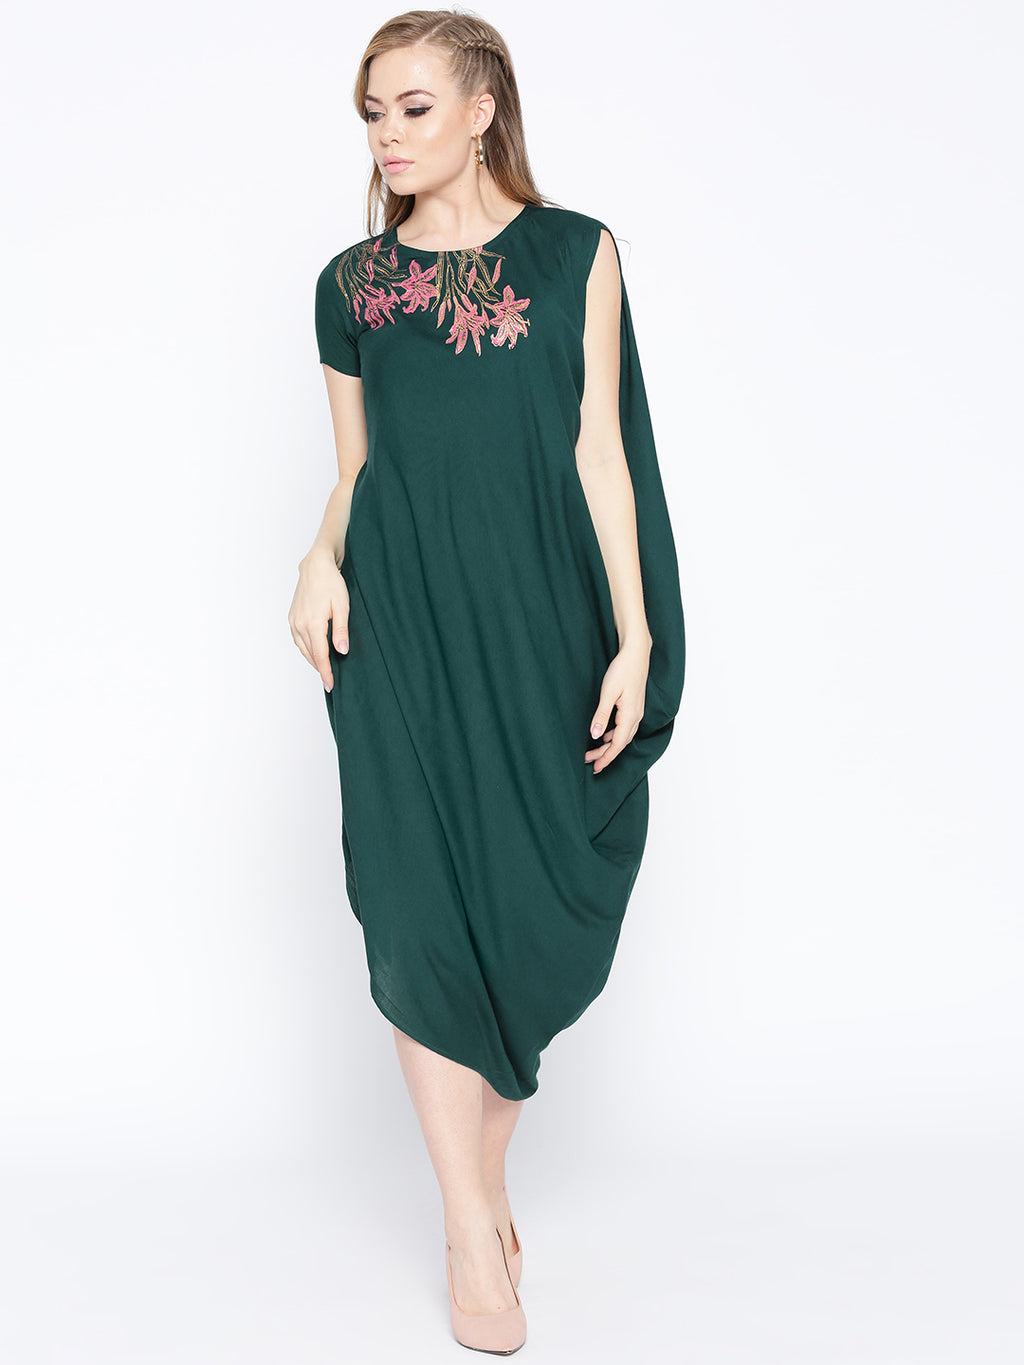 One side cowl asymettric dress with side floral print